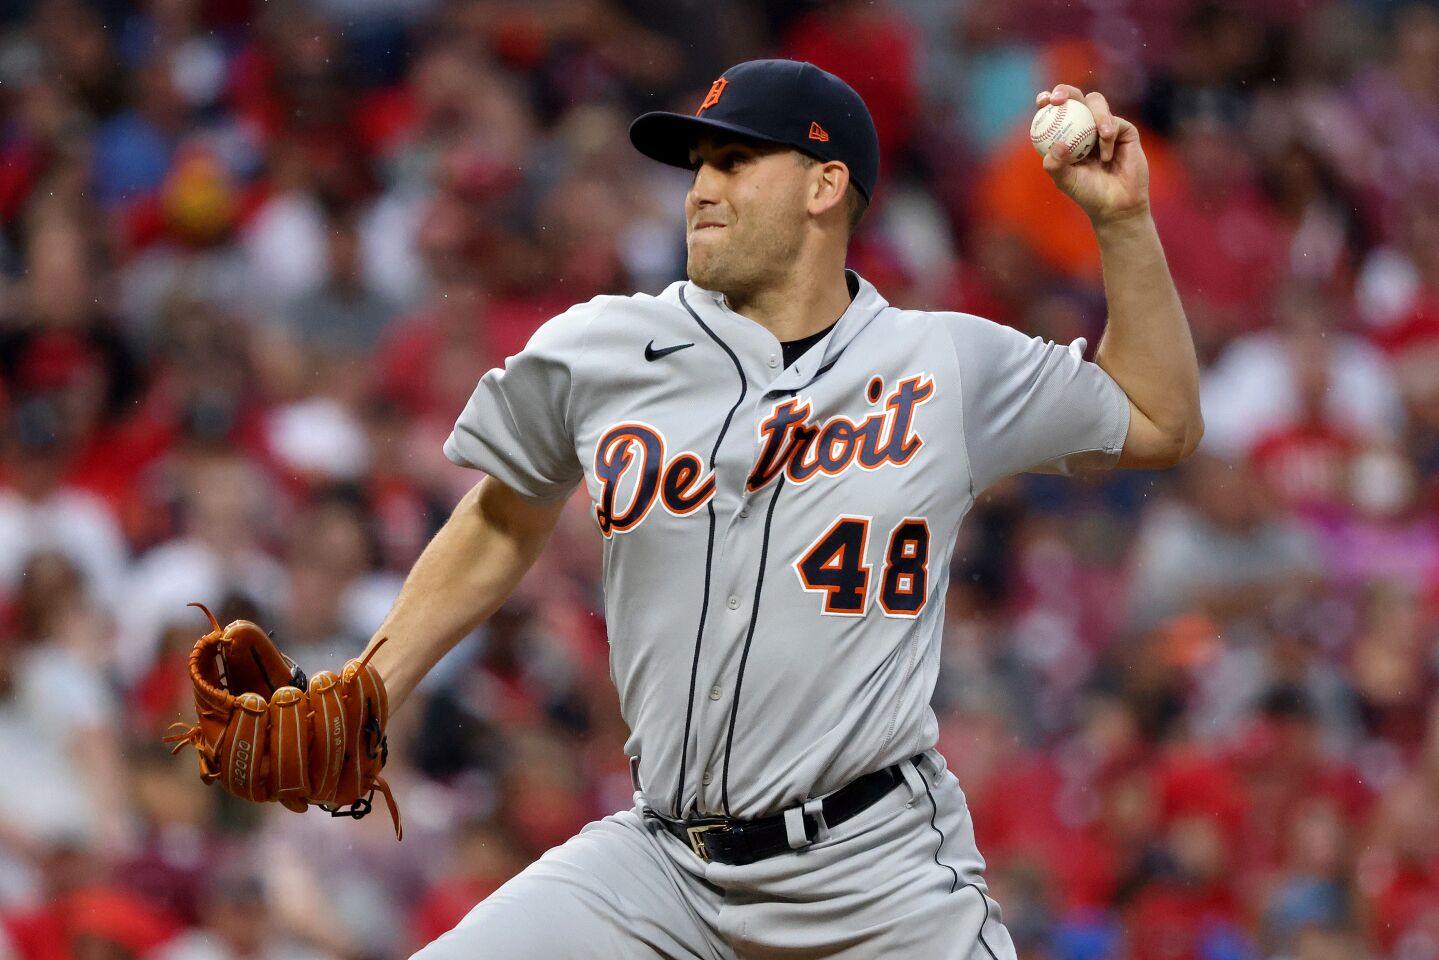 20 | Detroit Tigers (68-76; LW: 20)Matthew Boyd (3.89 ERA) likely won’t pitch again this season, but the Tigers sure hope he gets good news from this week’s visit with elbow specialist Keith Meister.